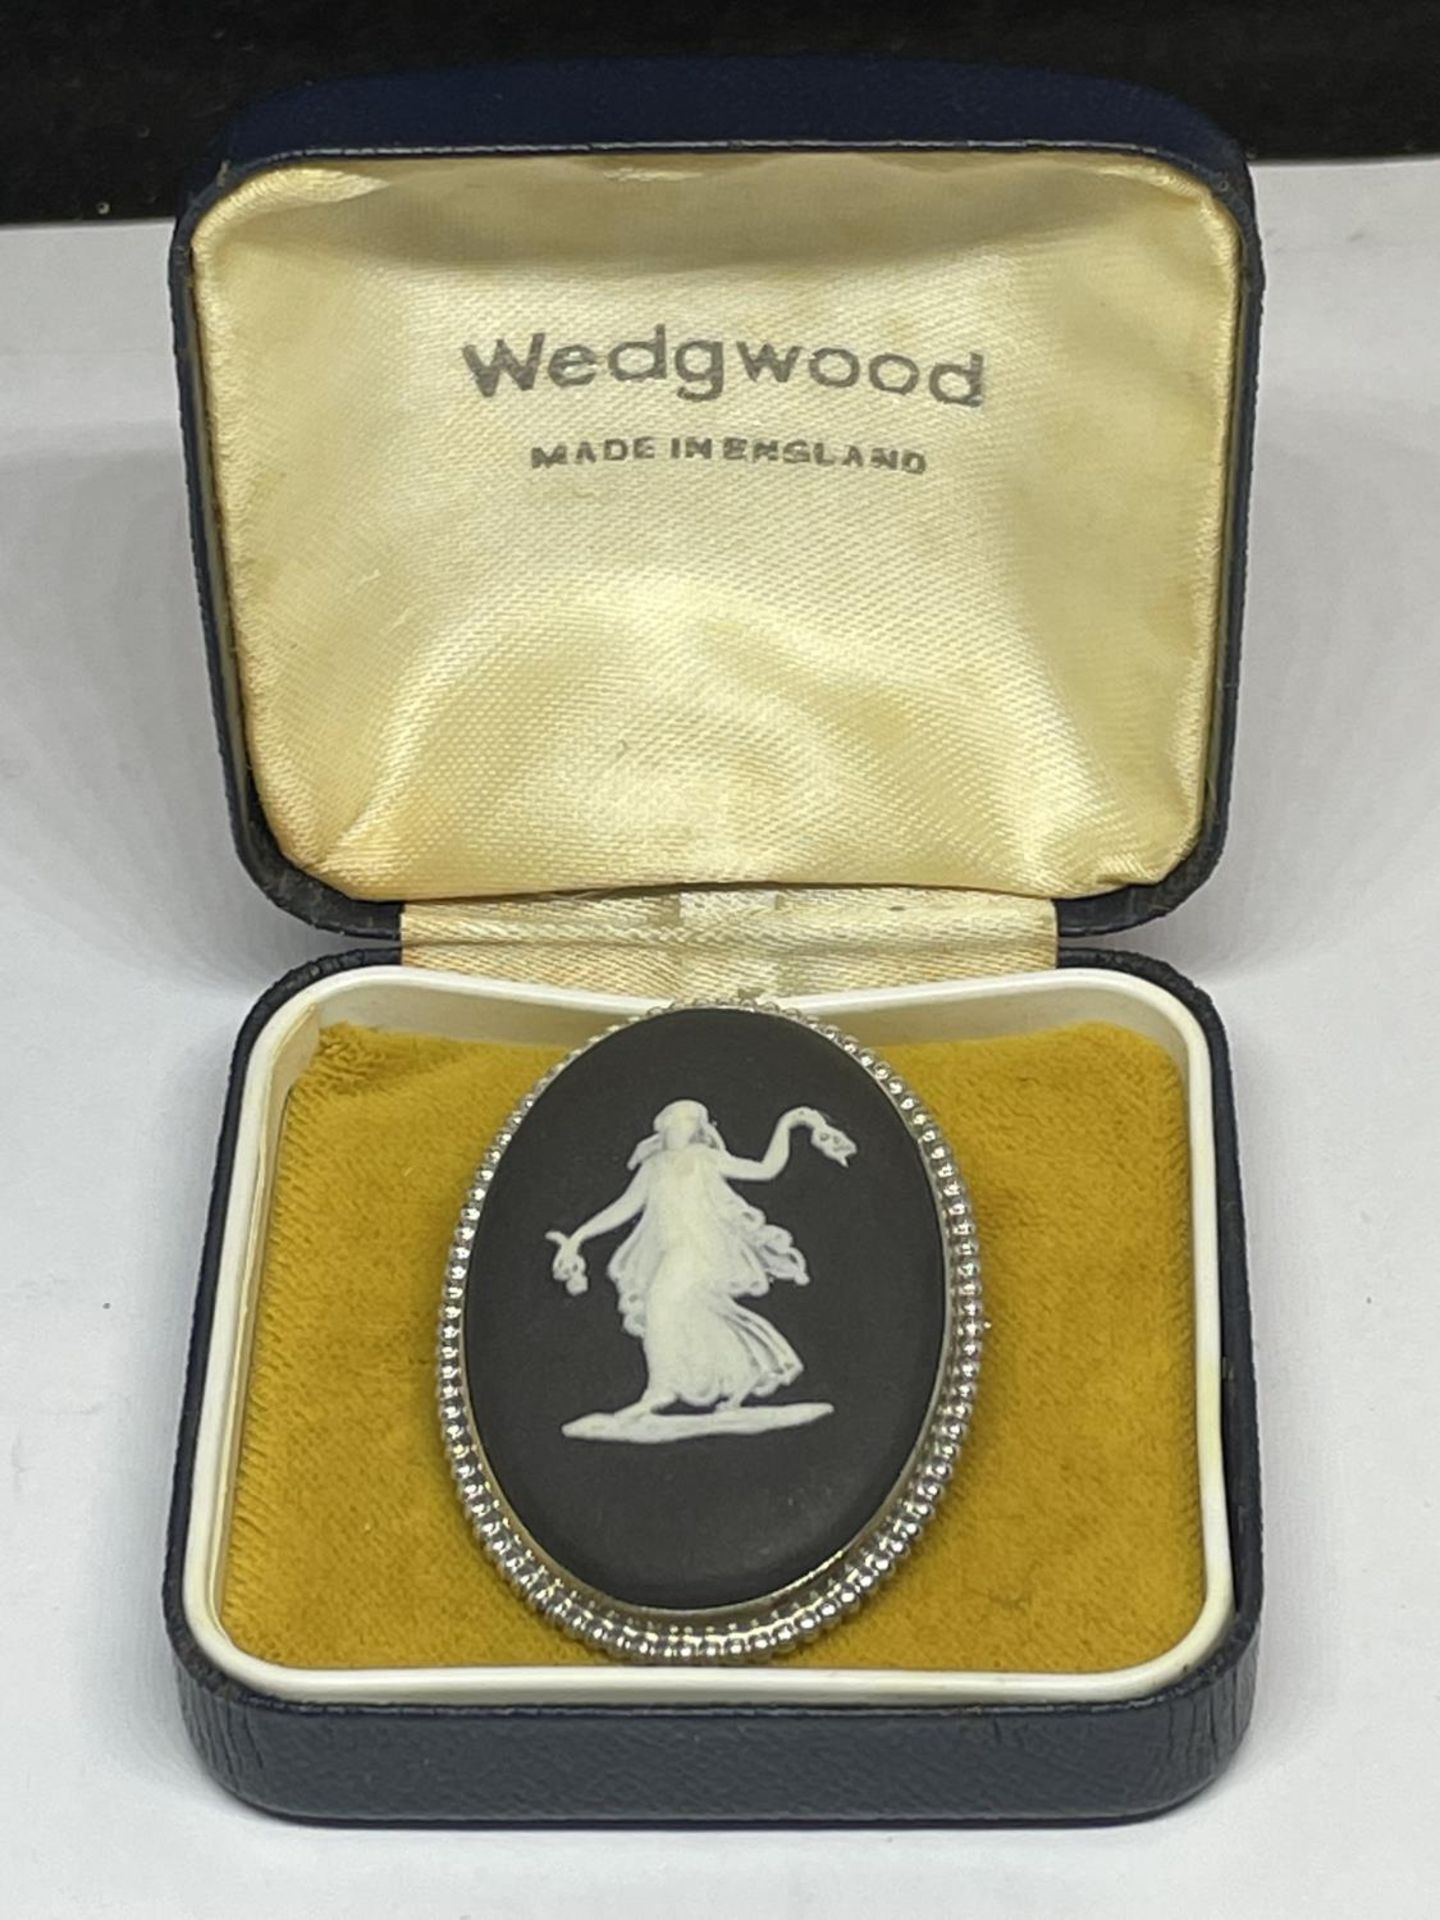 A SILVER MOUNTED BLACK WEDGWOOD JASPERWARE PLAQUE BROOCH IN A WEDGWOOD PRESENTATION BOX - Image 4 of 5